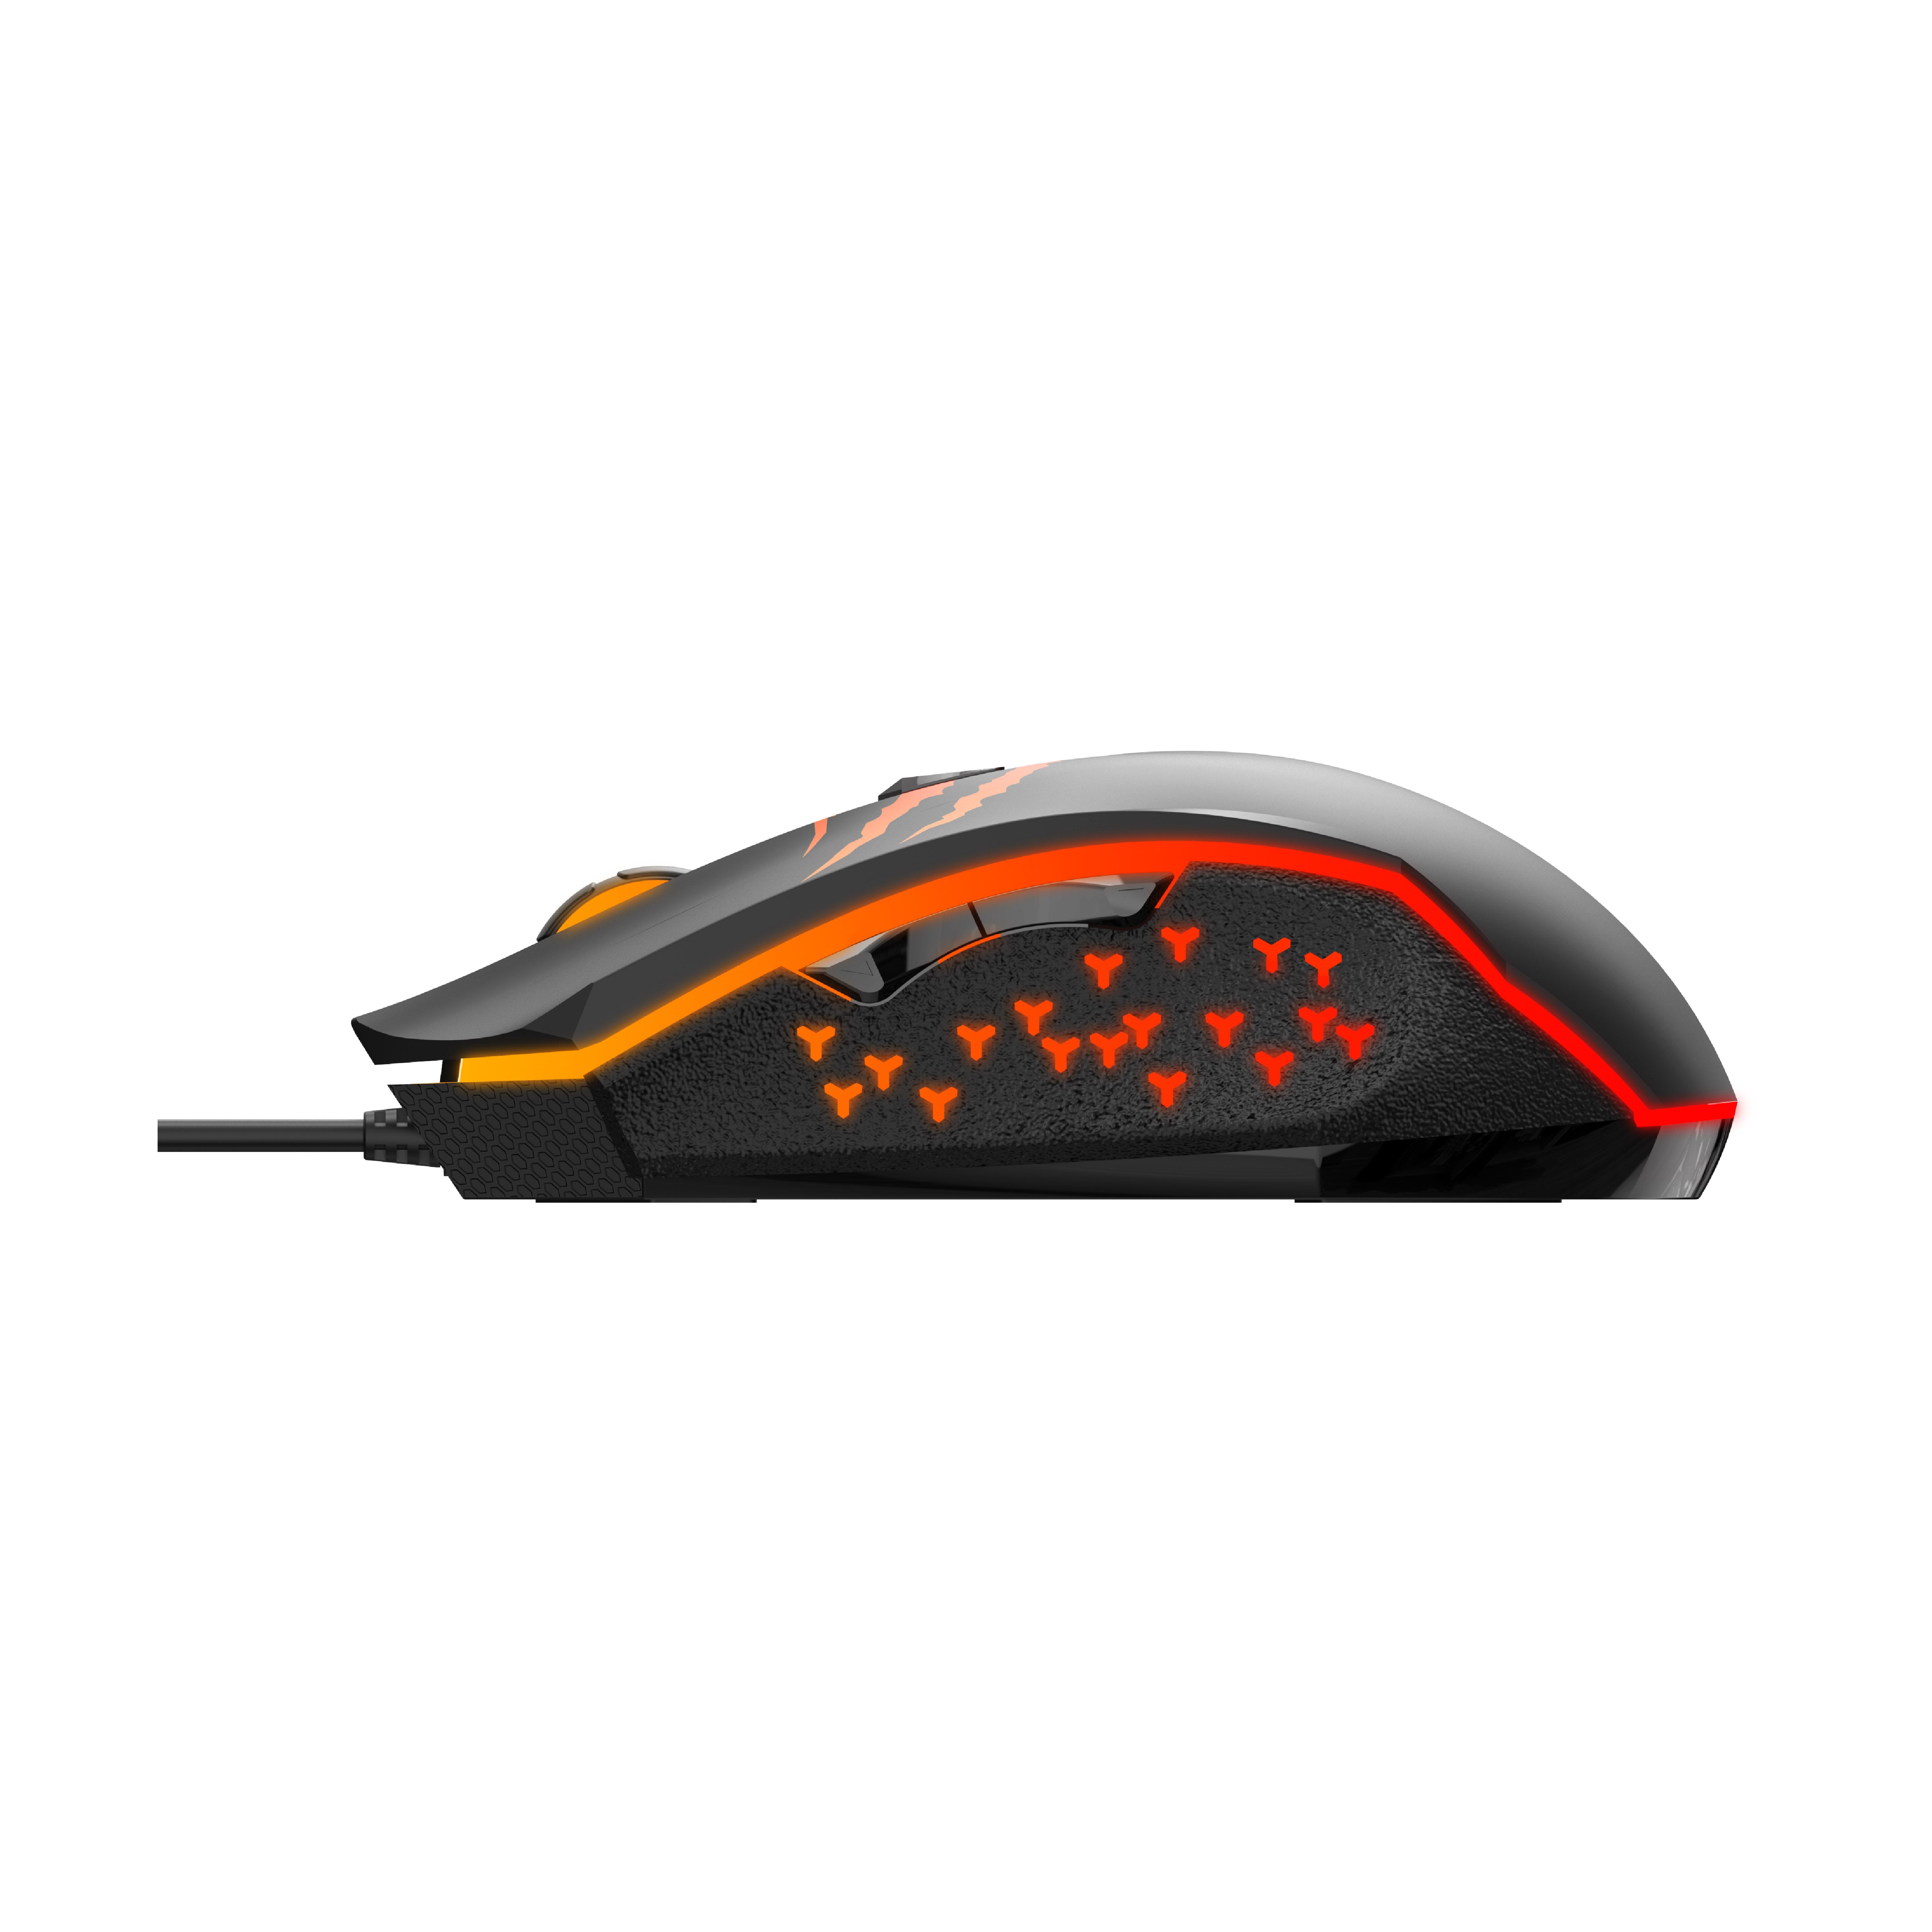 MS1027 Optical Gaming Mouse